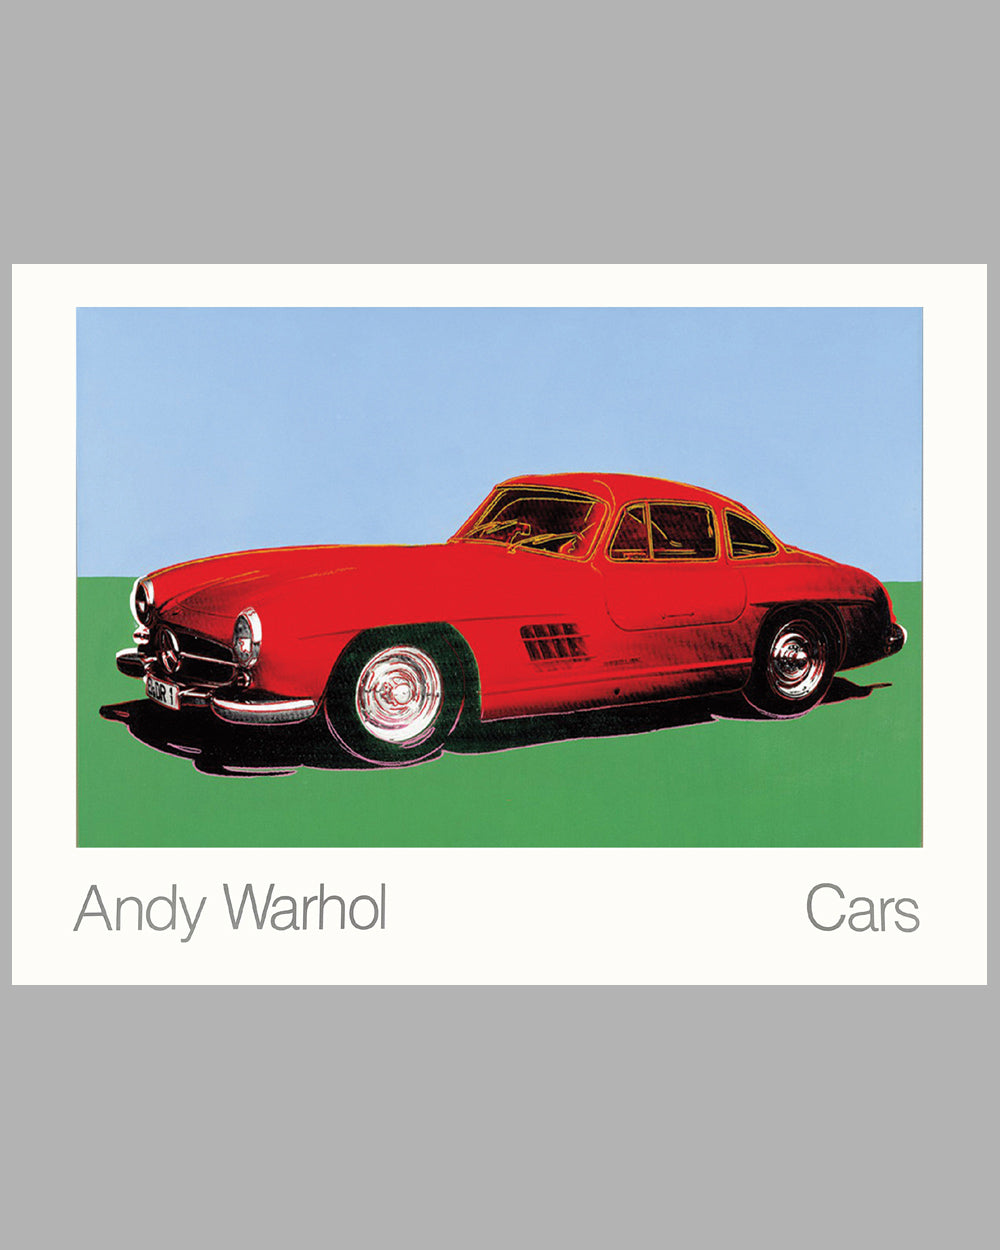 Commissioned by Mercedes Benz for their 100 year anniversary in 1986, featuring this famous sports car in gleaming red, 43" x 55" + linen backing, A- cond. (minor edge wear).